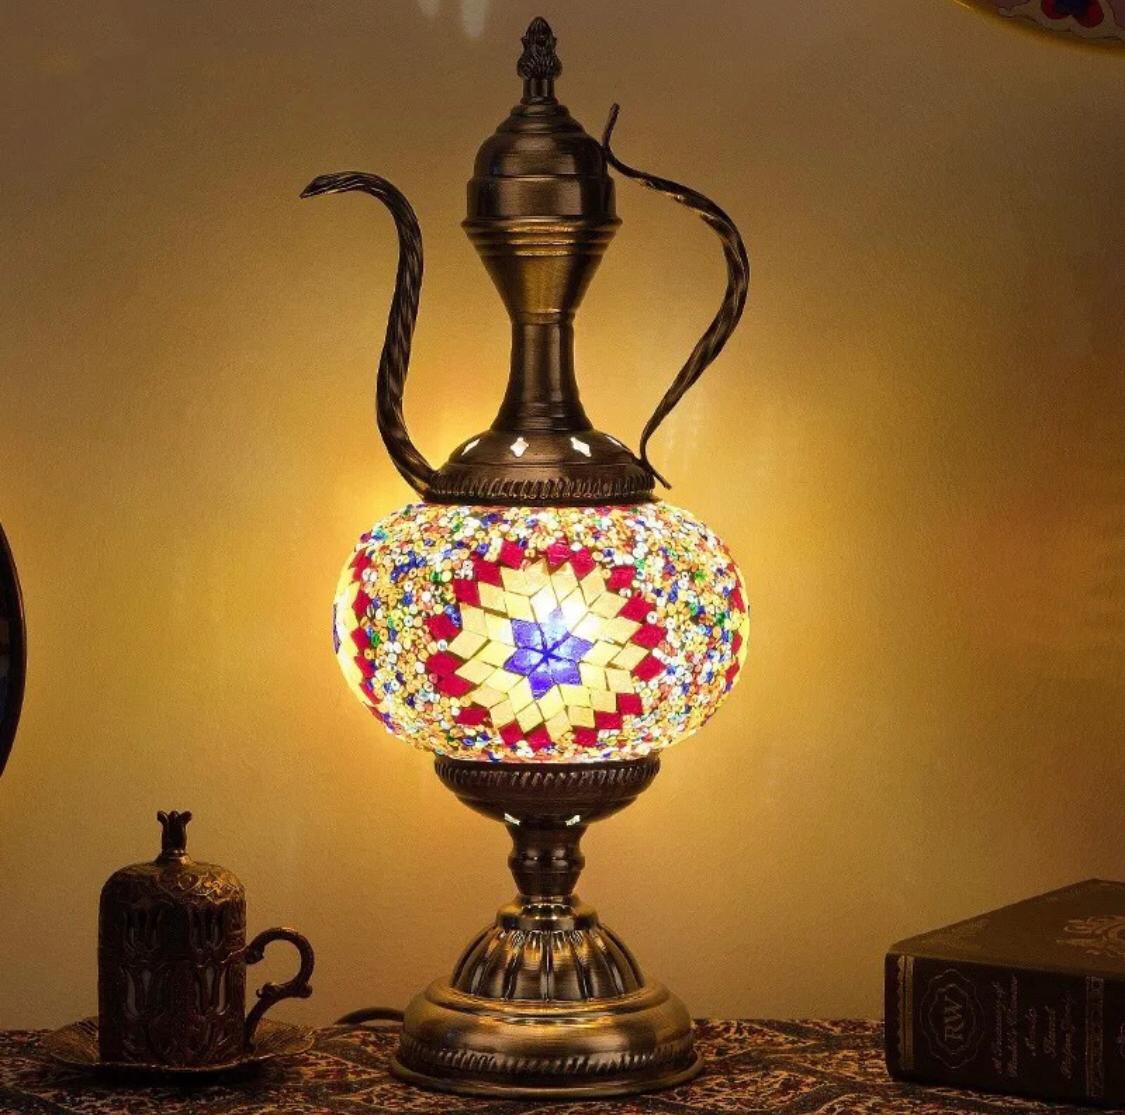 Turkish mosaic table Lamp vintage art deco Handcrafted SF Traders